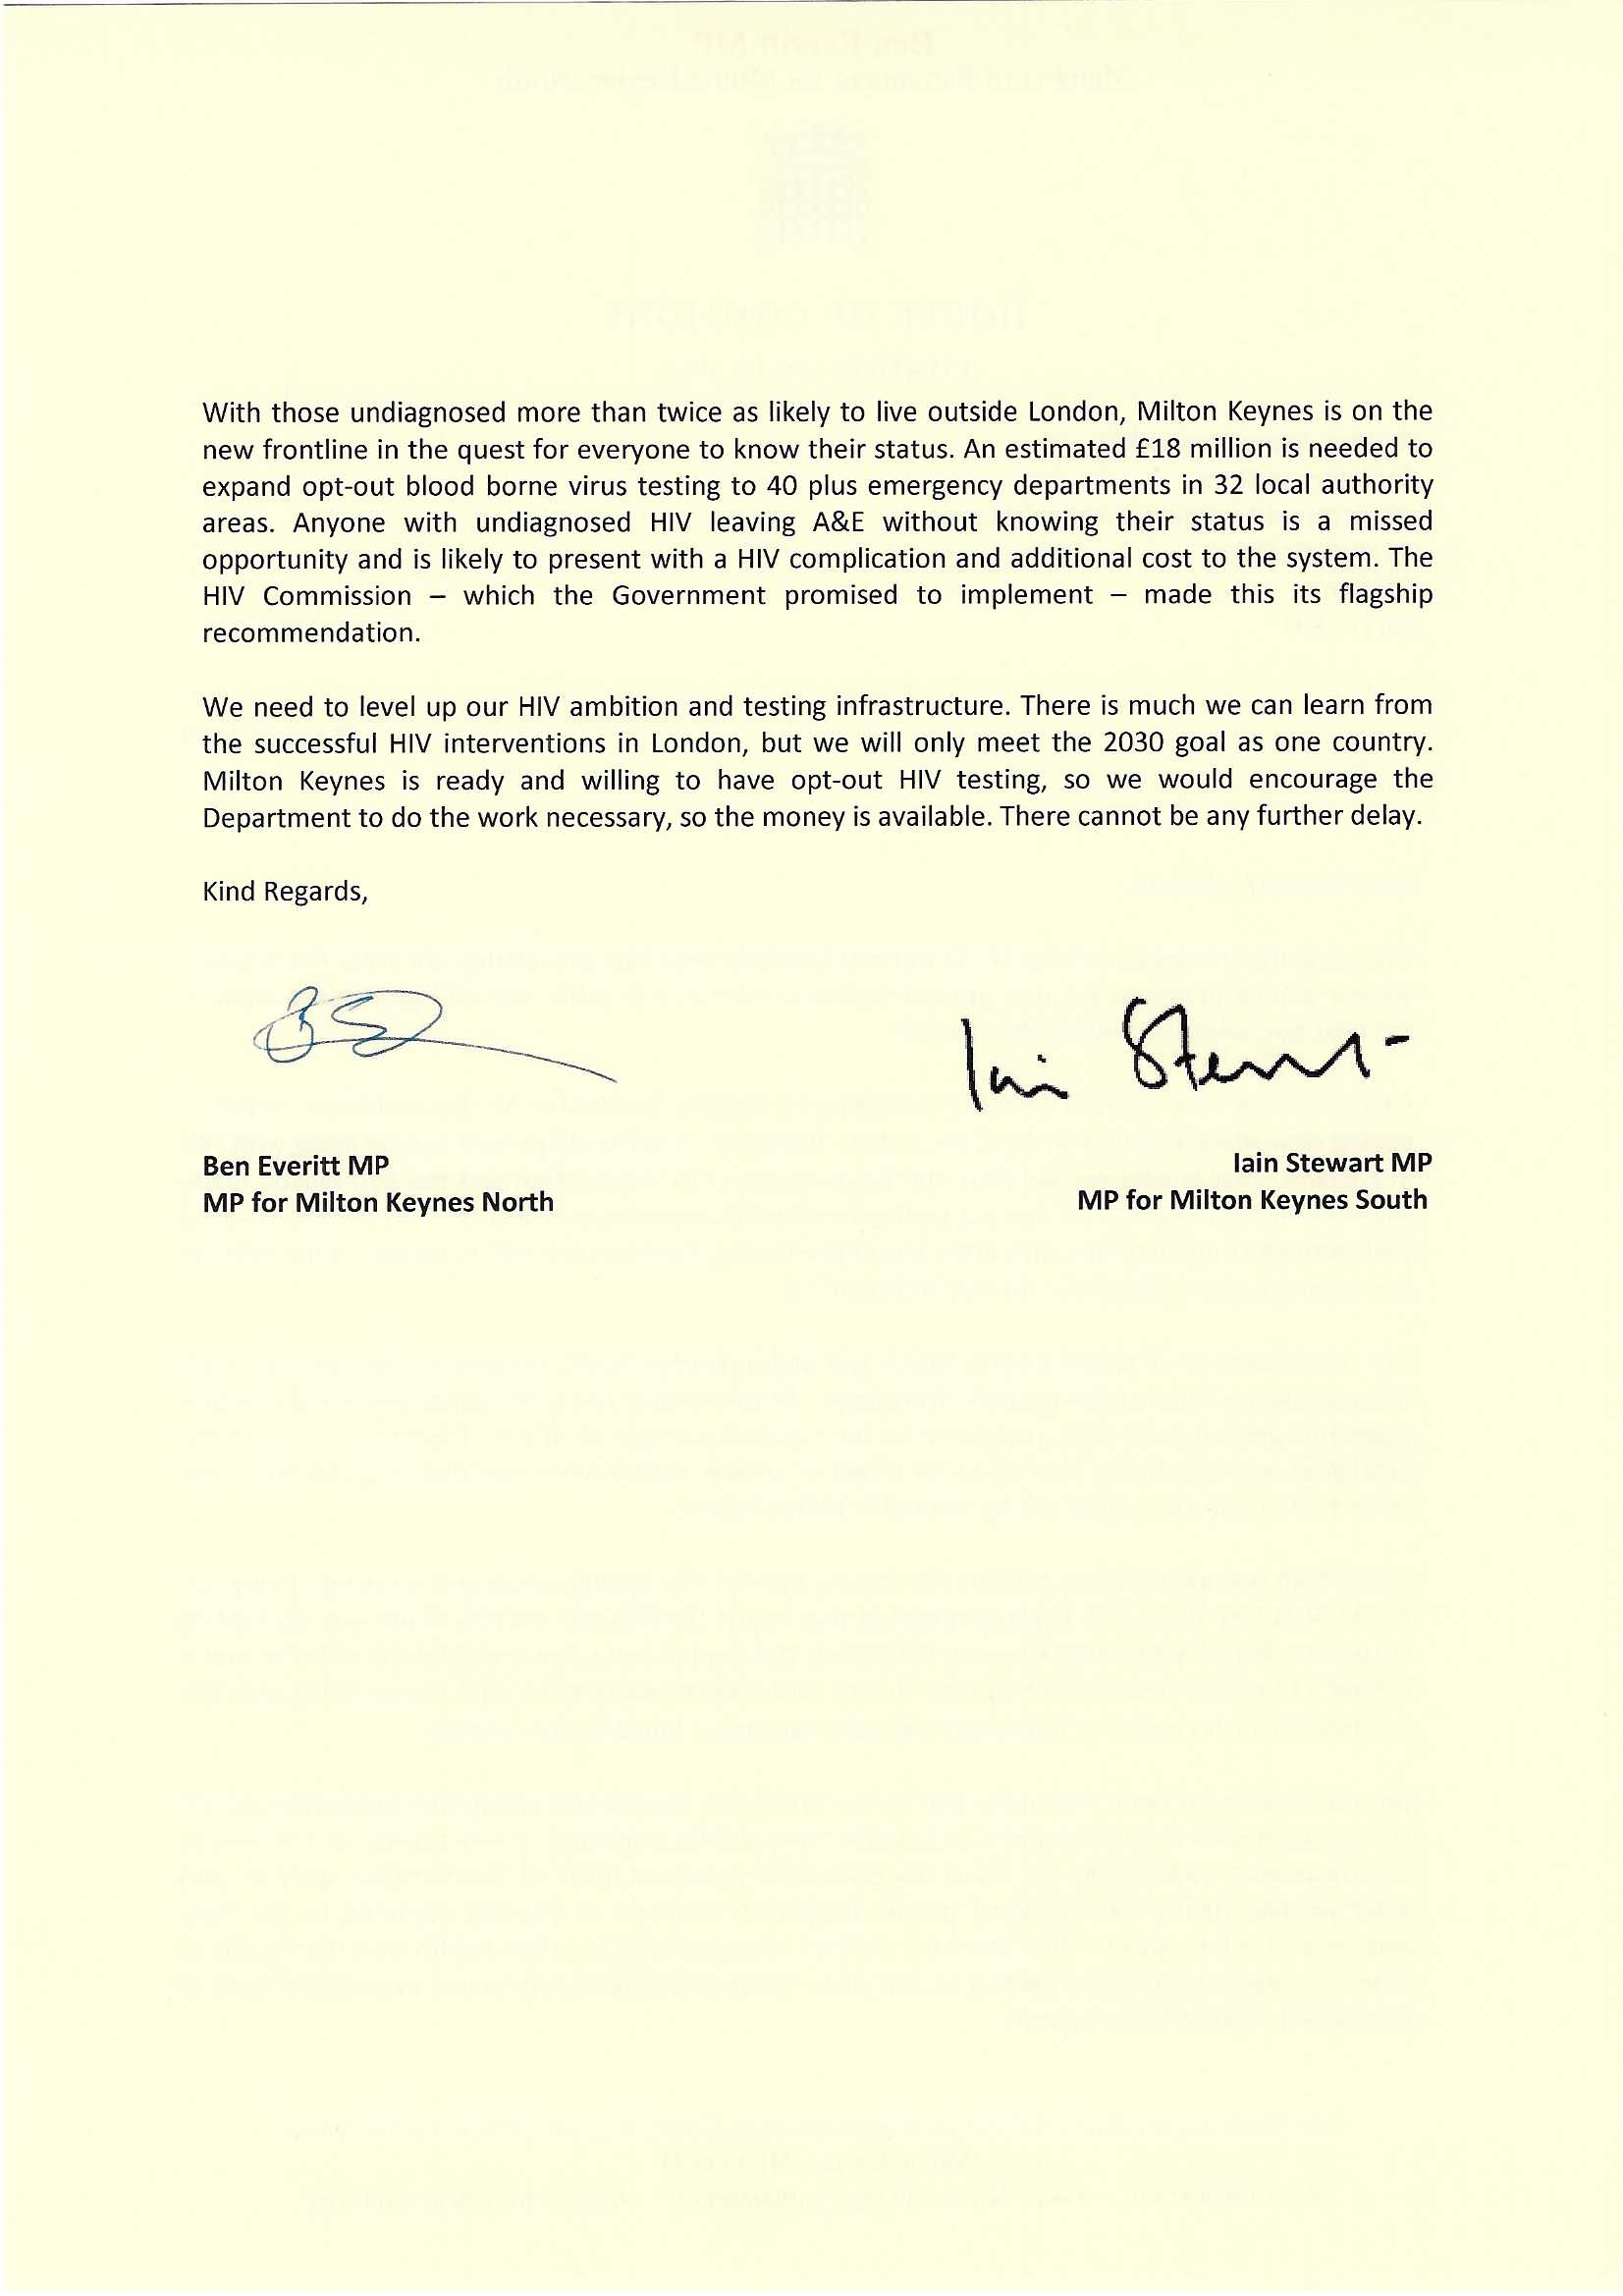 Part 2 of Iain Stewart MP and Ben Everitt MP letter on HIV testing to Steve Barclay